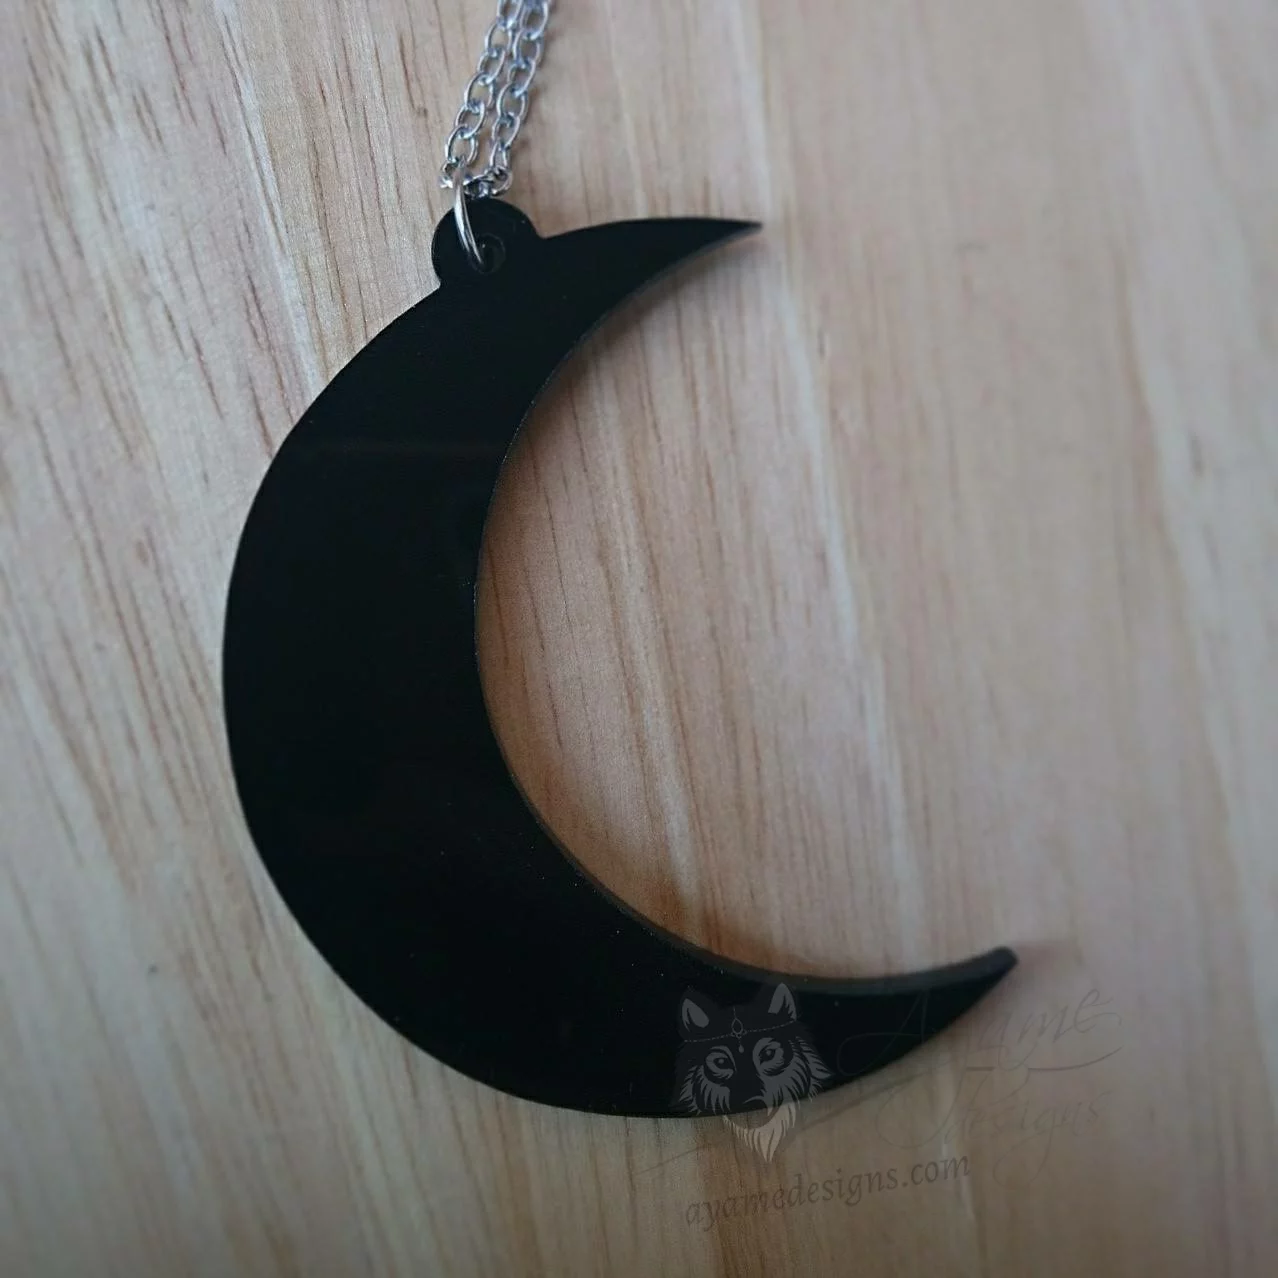 A laser cut perspex crescent moon pendant on a stainless steel adjustable chain